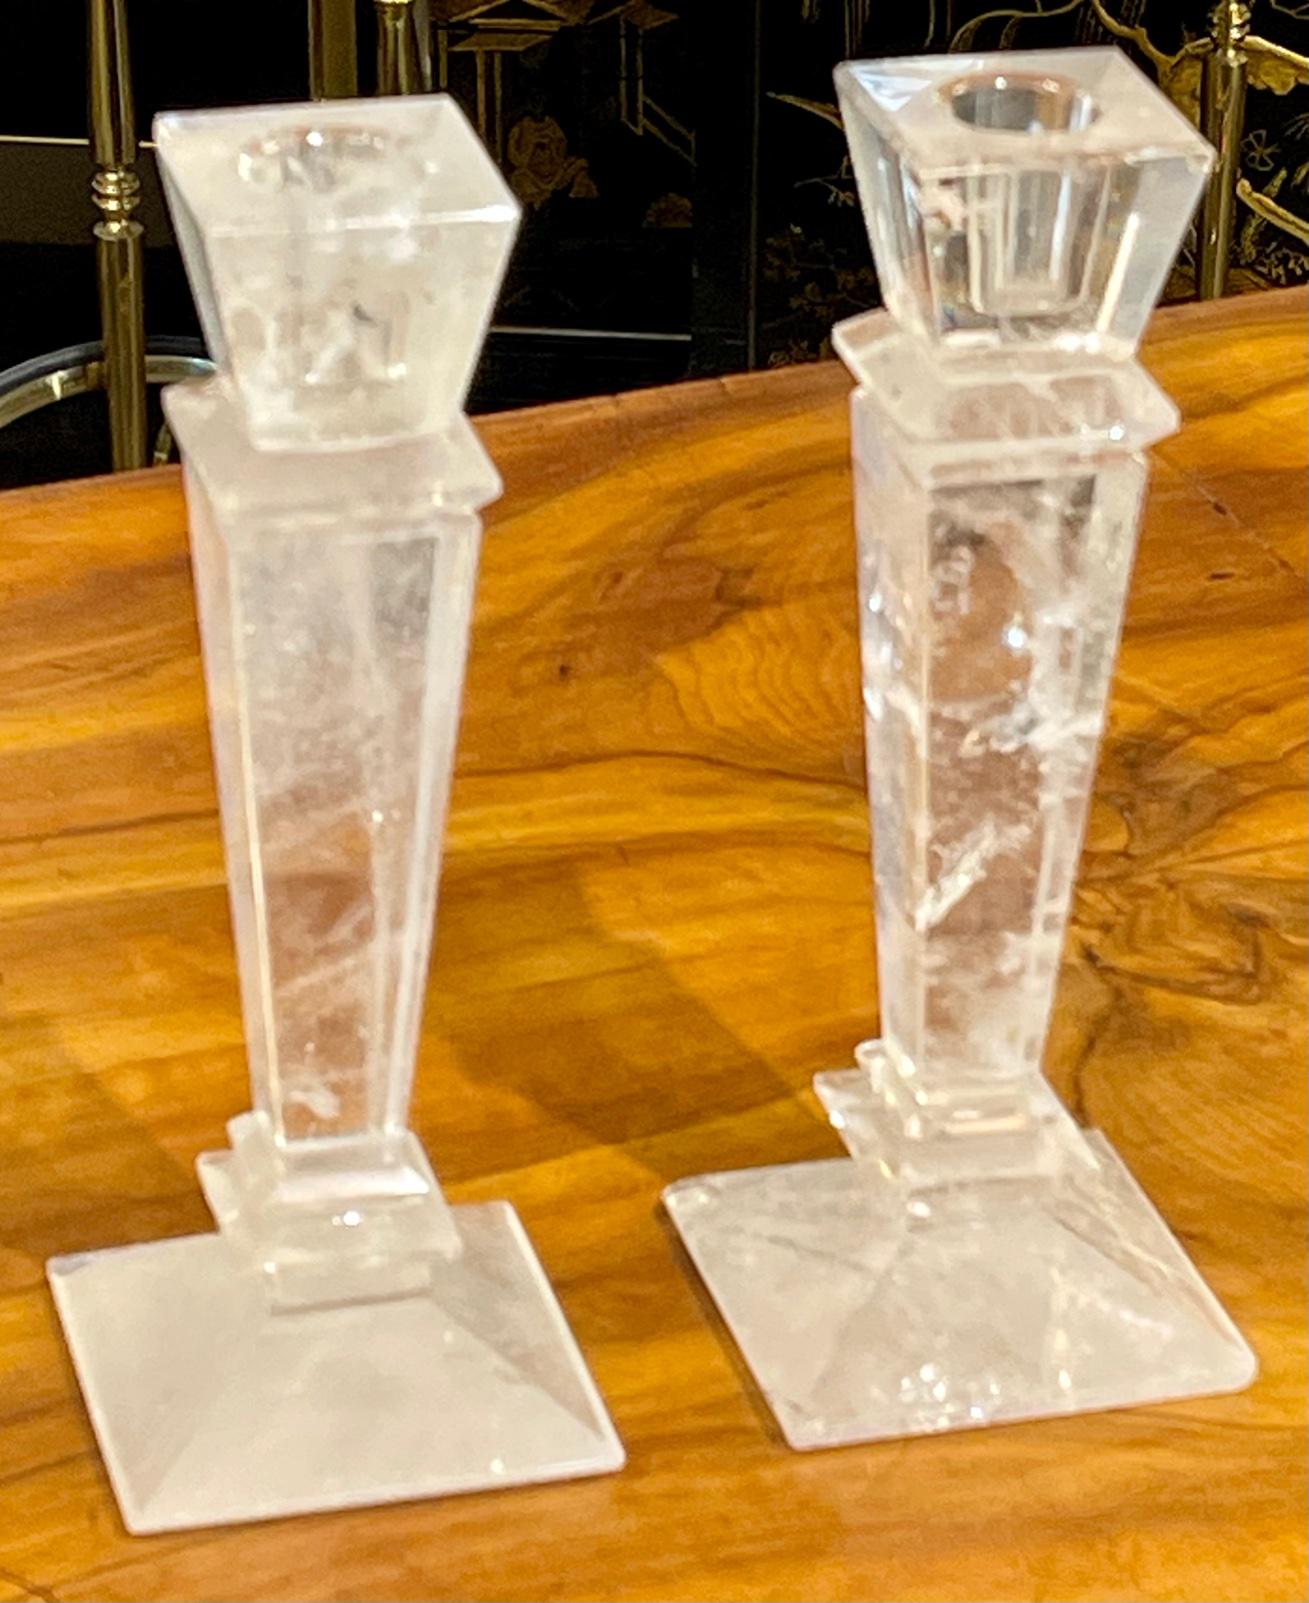 Pair of modern Brazilian polished rock crystal candlesticks. Circa 2000. A fine addition to any home!